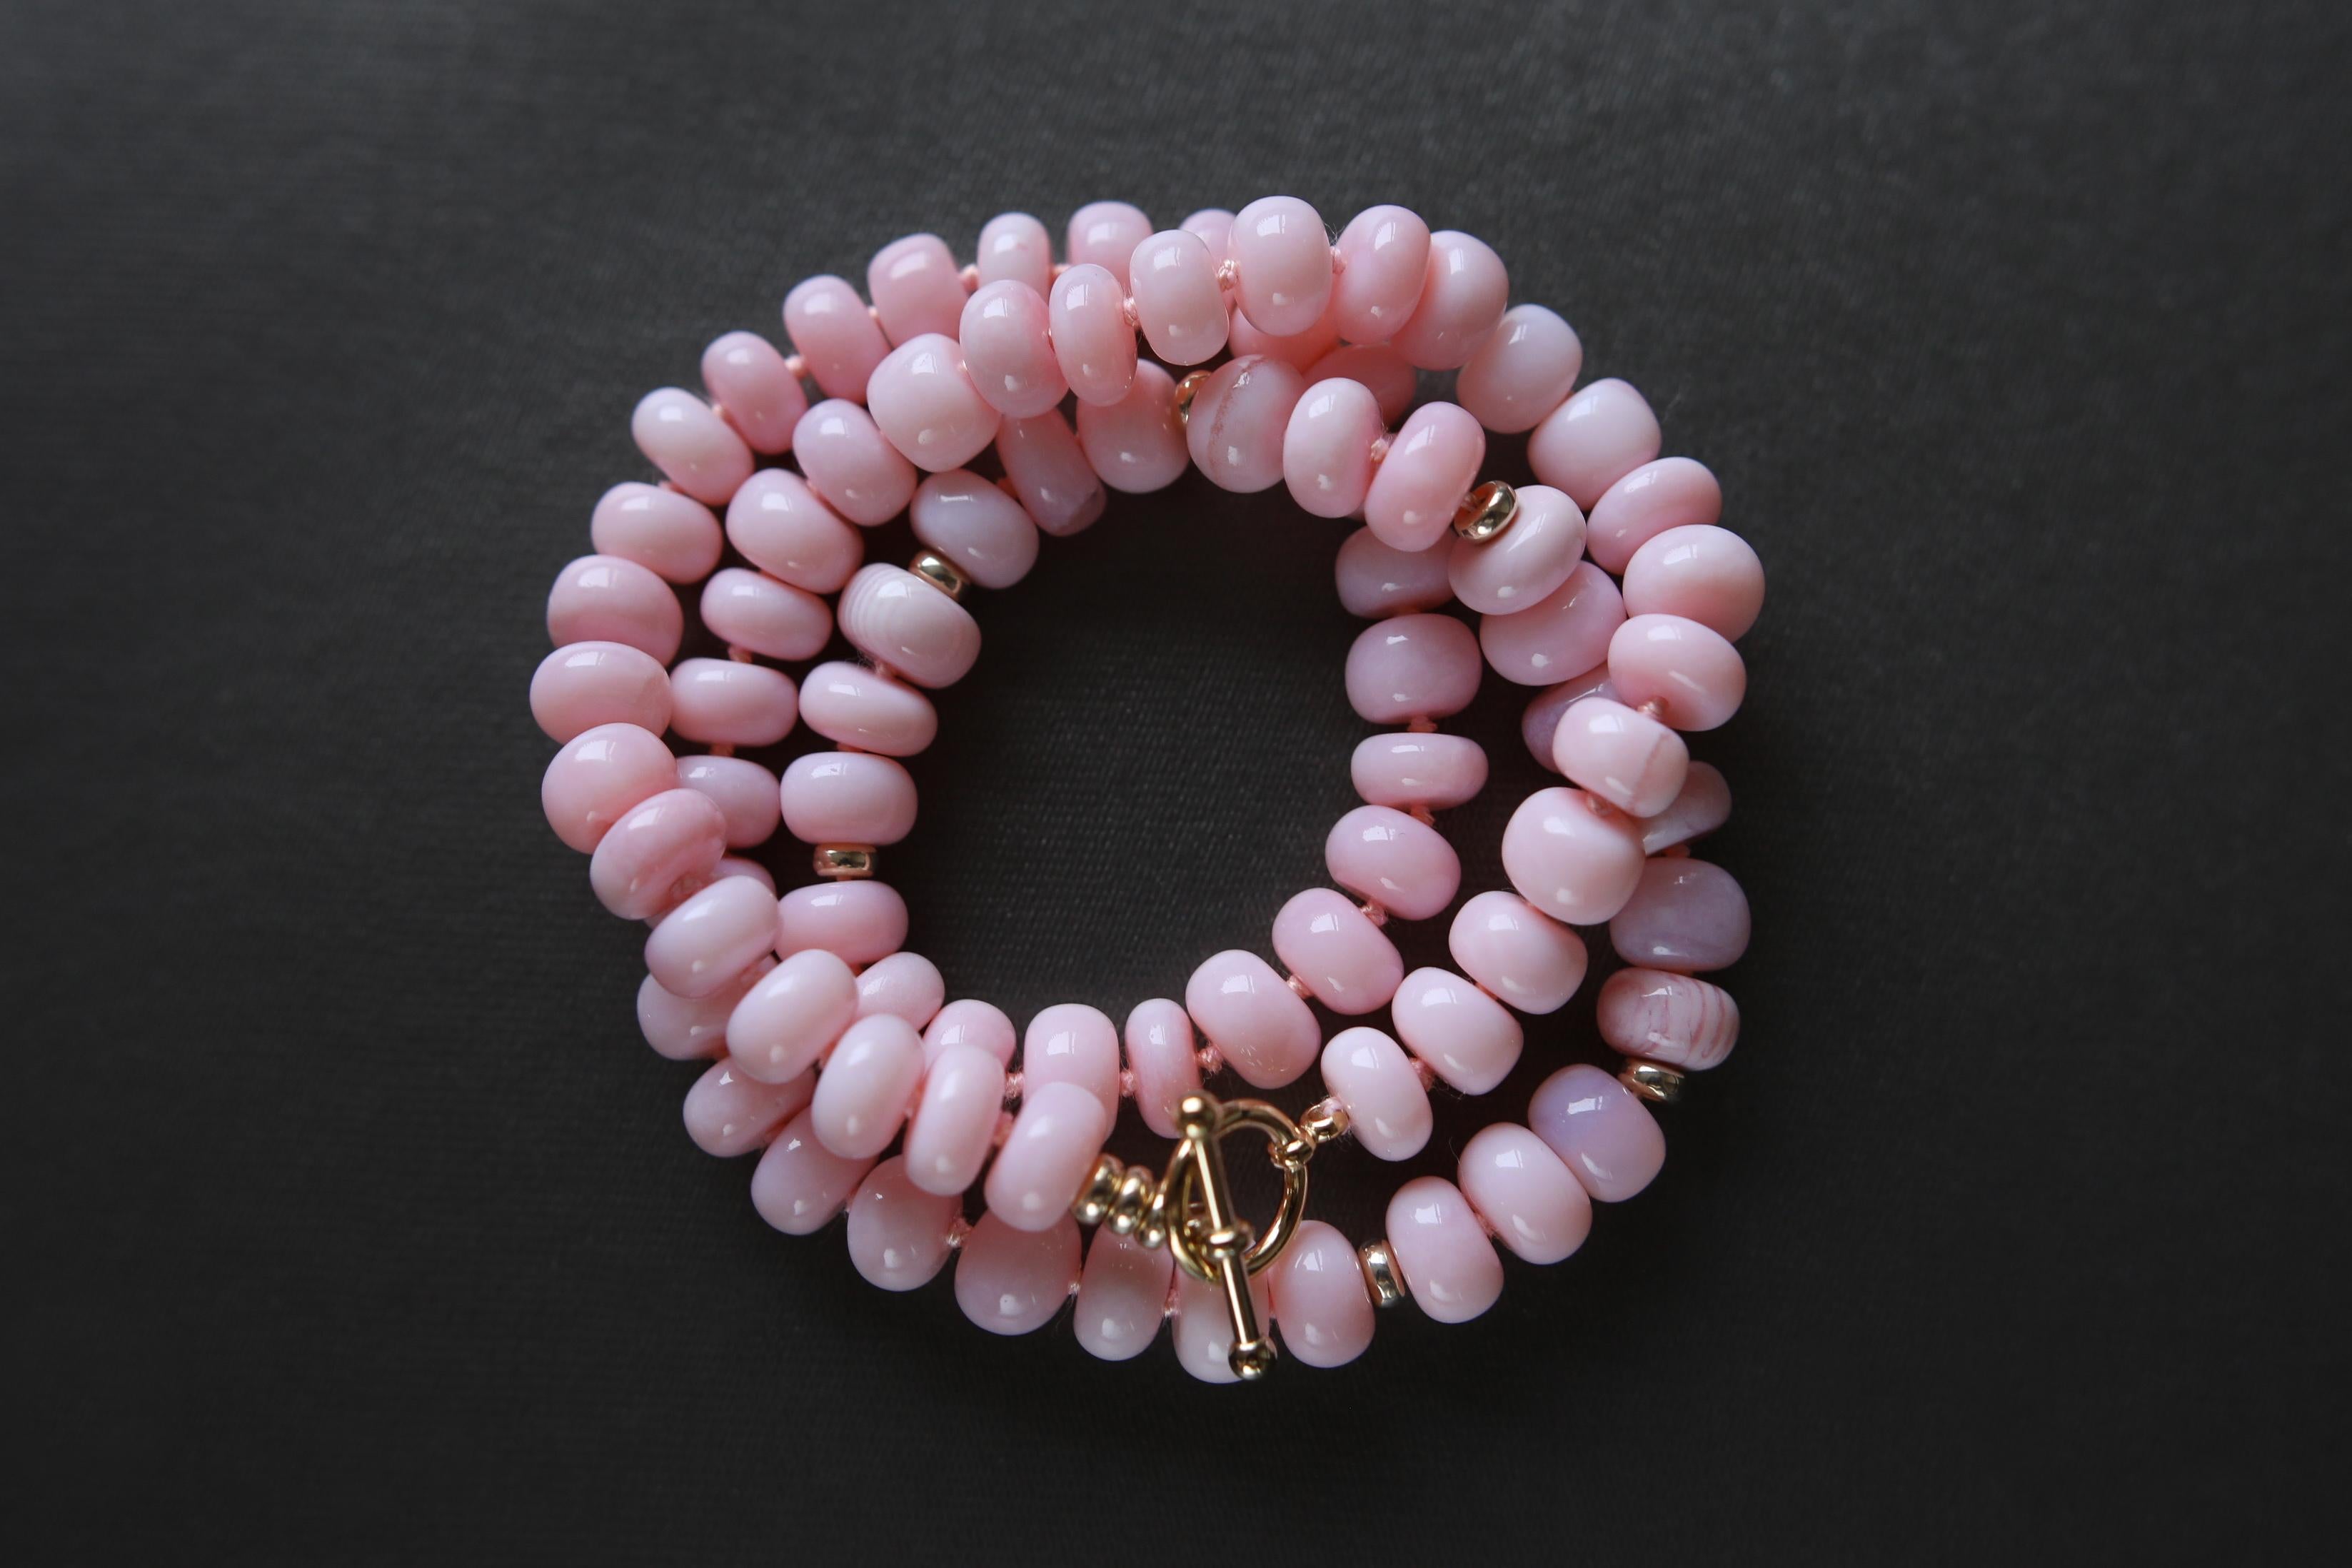 A fashion favorite, stunning natural gem quality Peruvian Pink Opal bead bracelet/necklace with seven evenly dispersed yellow gold beads and gold plated toggle clasp. Each 8.5 mm bead is knotted with silk cord. Handmade in San Francisco. 
This